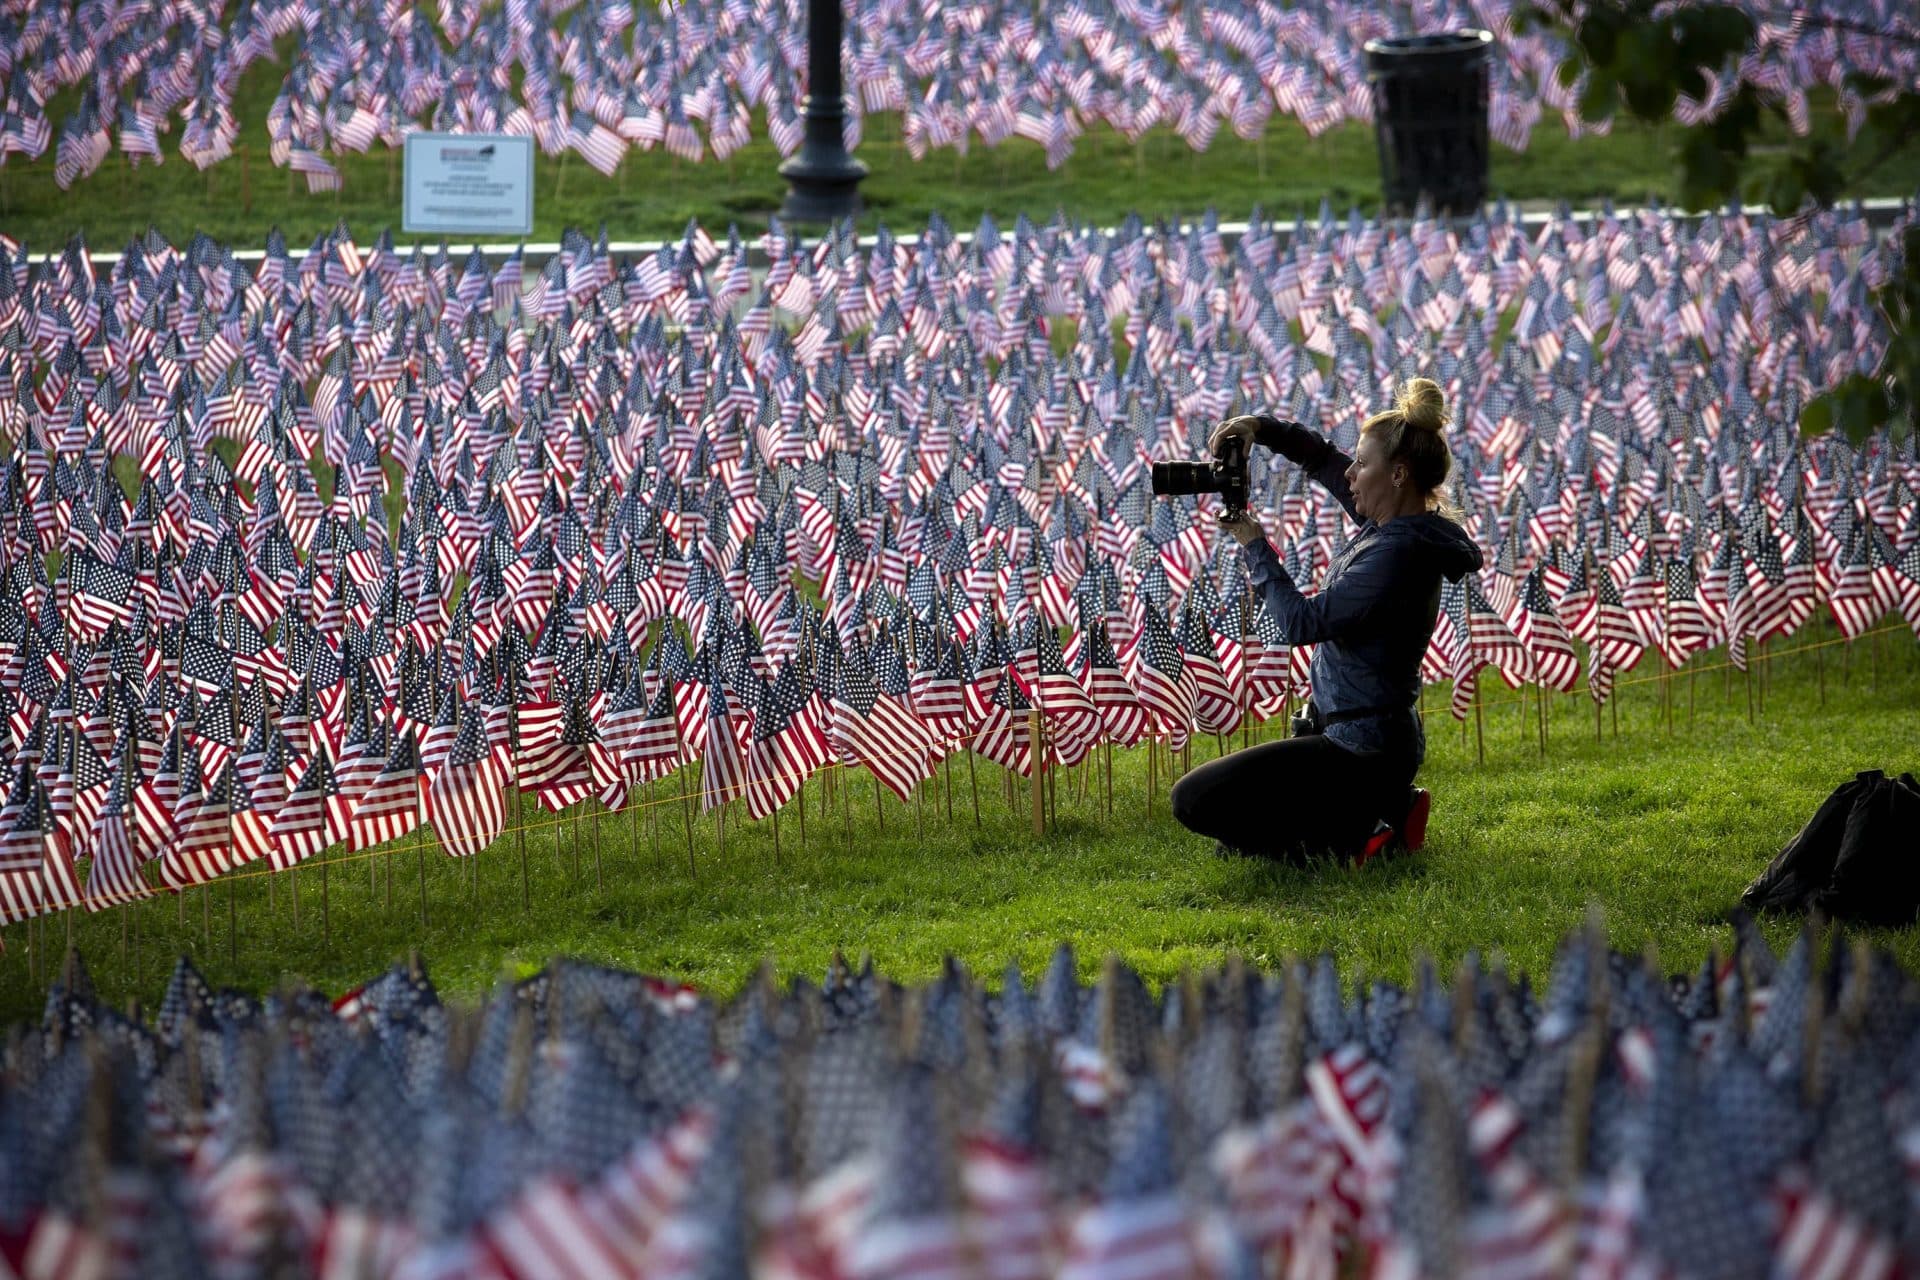 A photographer captures an image of the thousands of flags planted in memory of fallen Massachusetts service members for Memorial Day. (Robin Lubbock/WBUR)